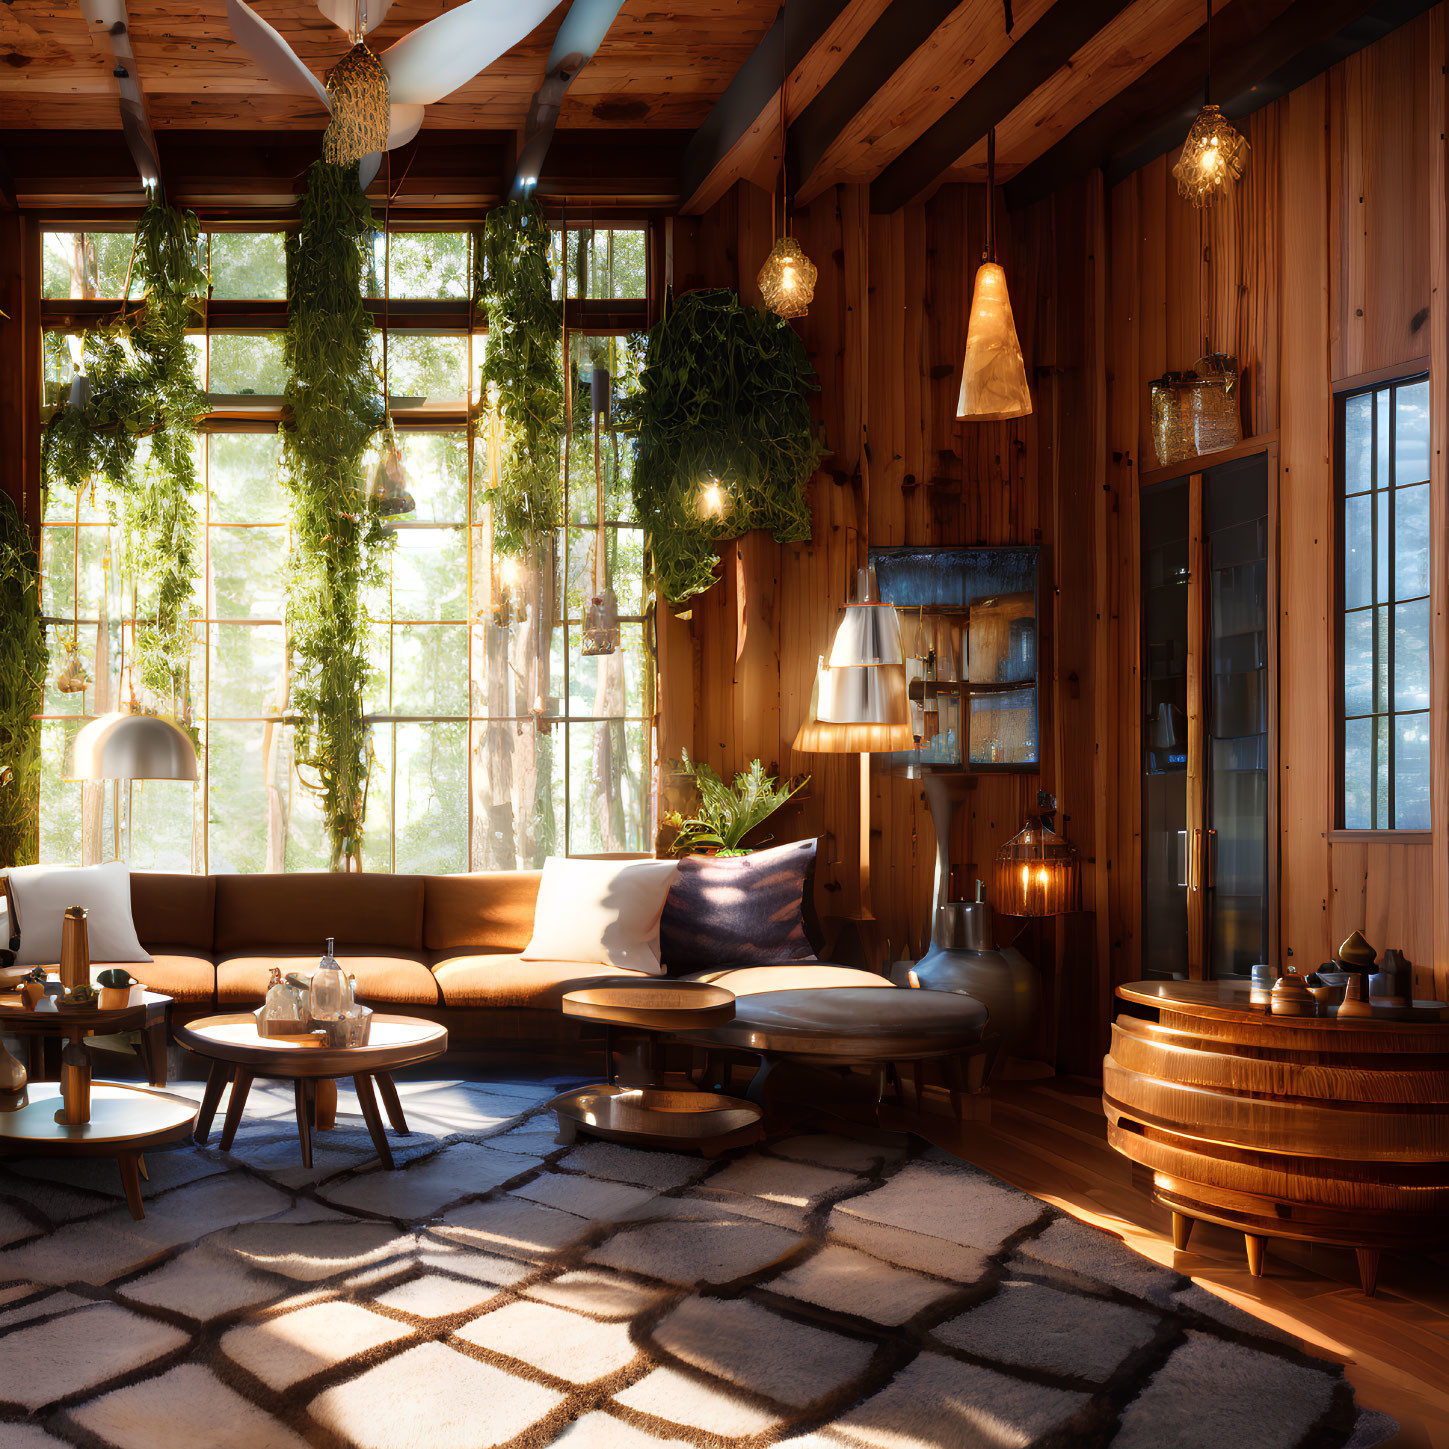 Warm Sunlit Wooden Cabin Living Room with Plush Sofas & Green Plants